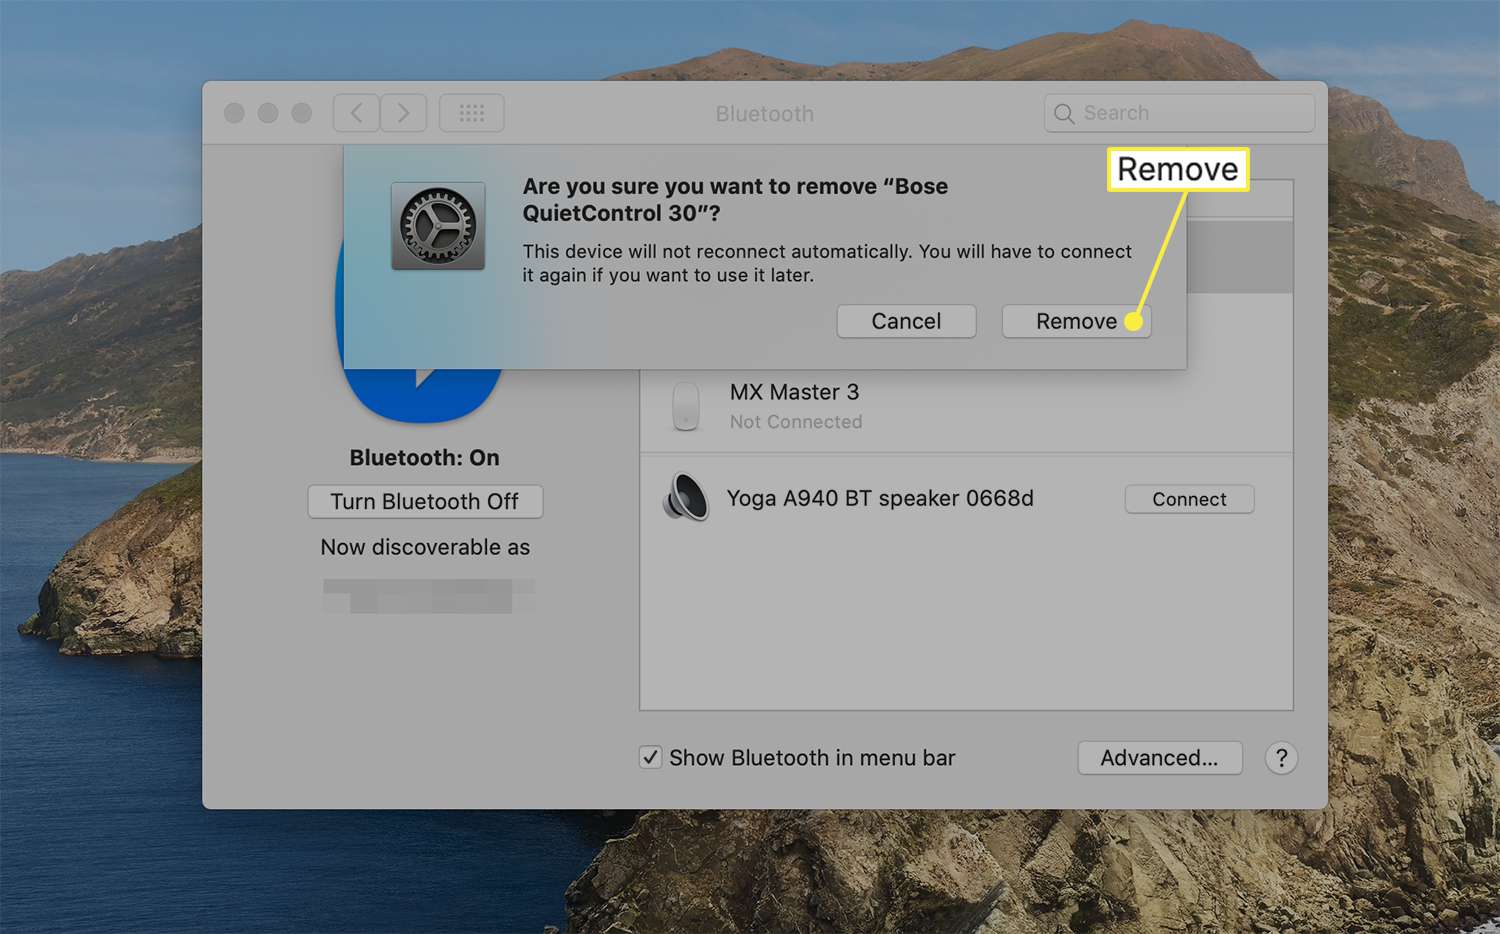 Remove dialog box to confirm unpairing of a connected Bluetooth device on macOS